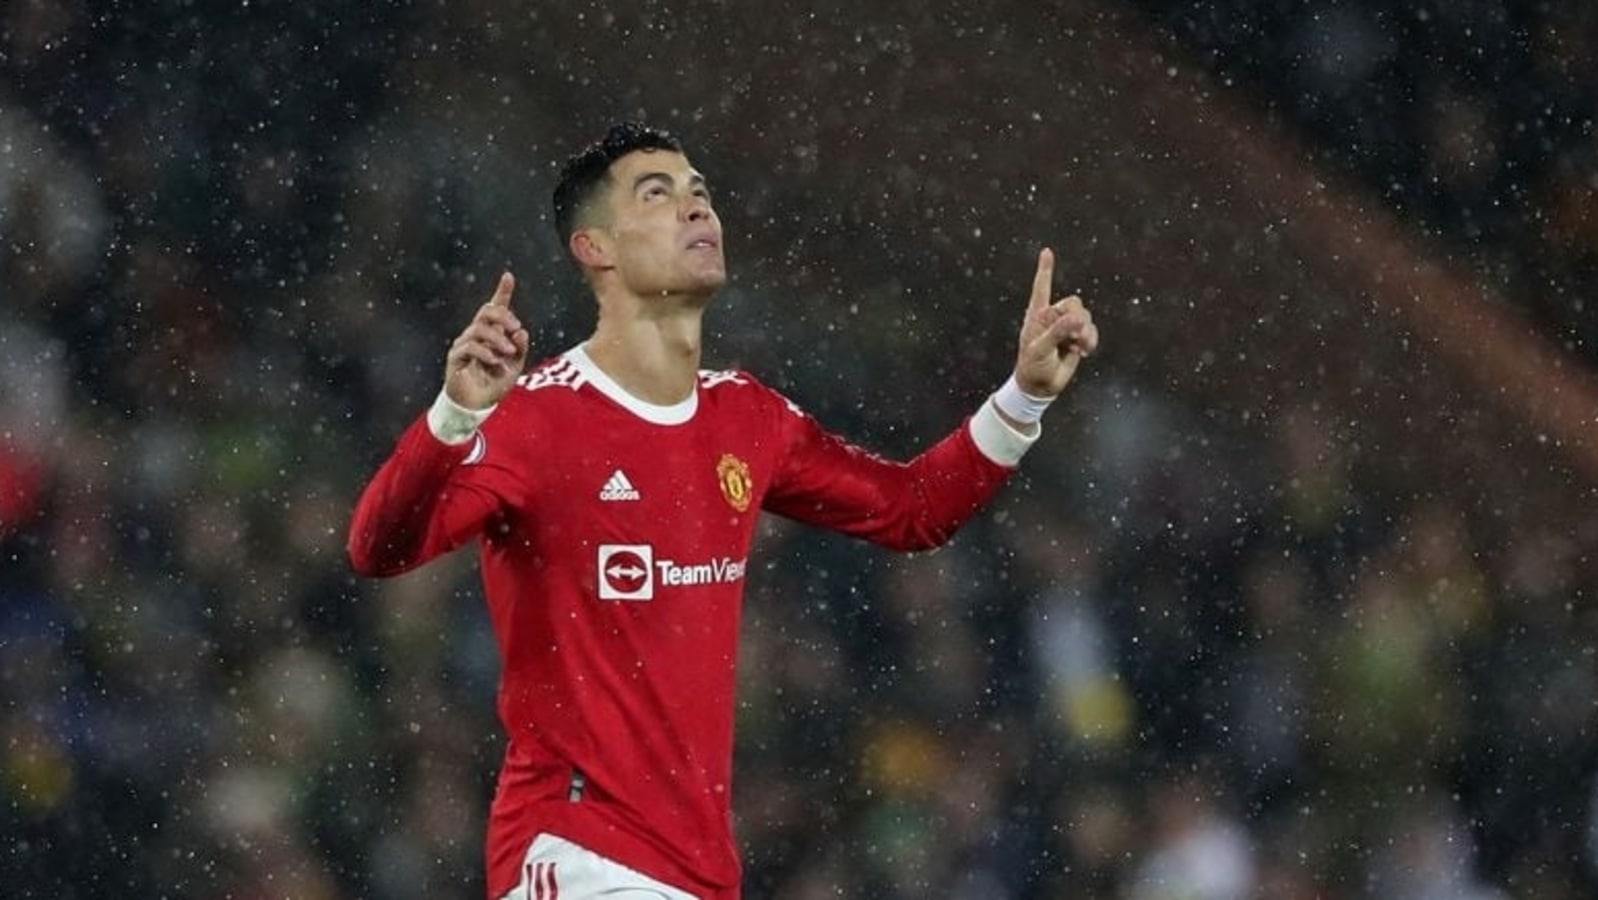 Manchester United and Ronaldo: An odd couple who might need to work it out | Soccer Information